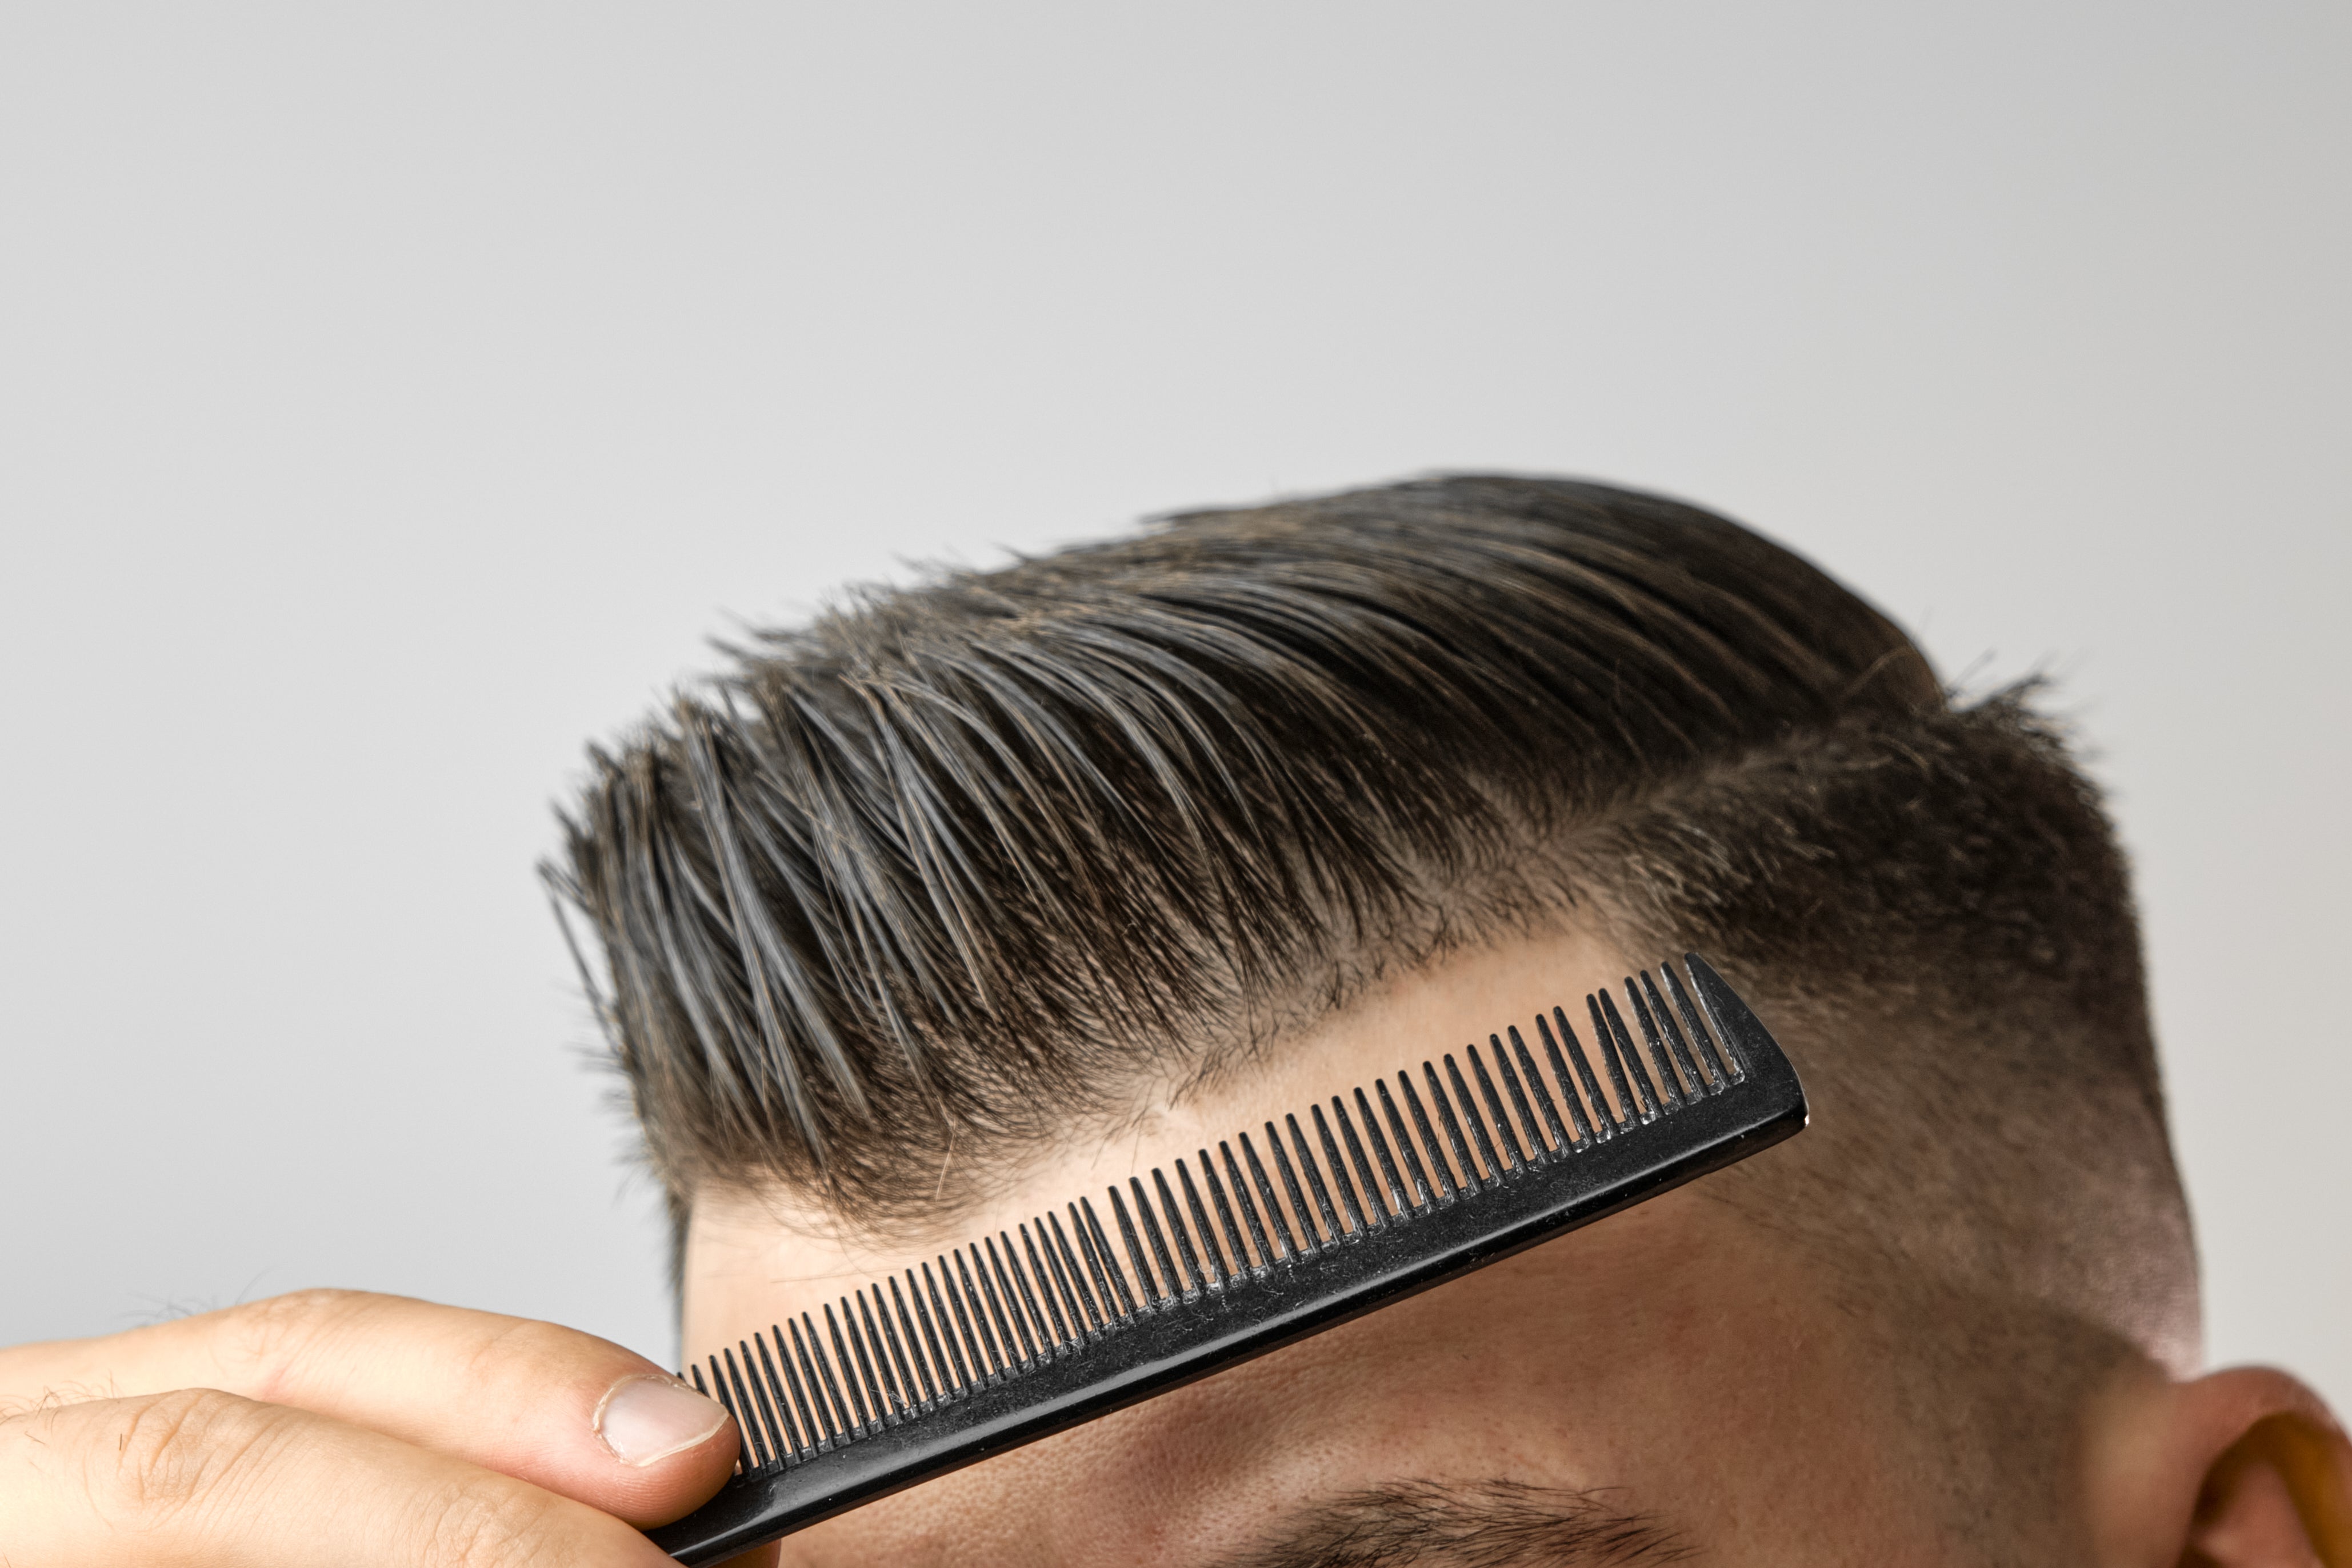 A close-up view of a man's hair being combed, showcasing the glossy finish achieved using hair pomade.